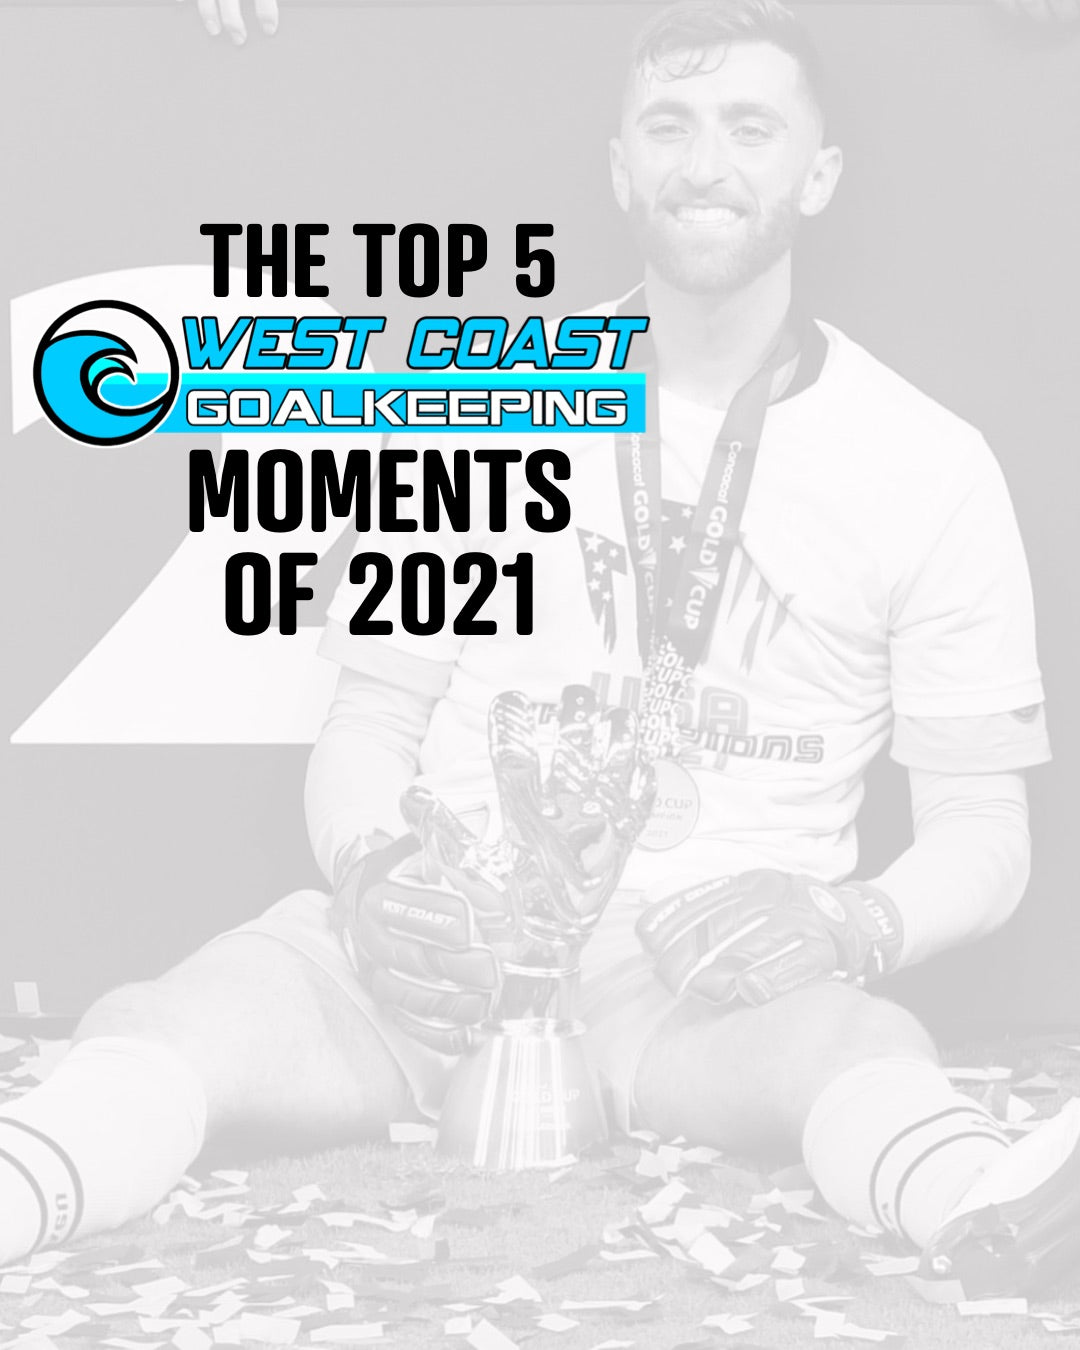 The Top 5 West Coast Moments of 2021